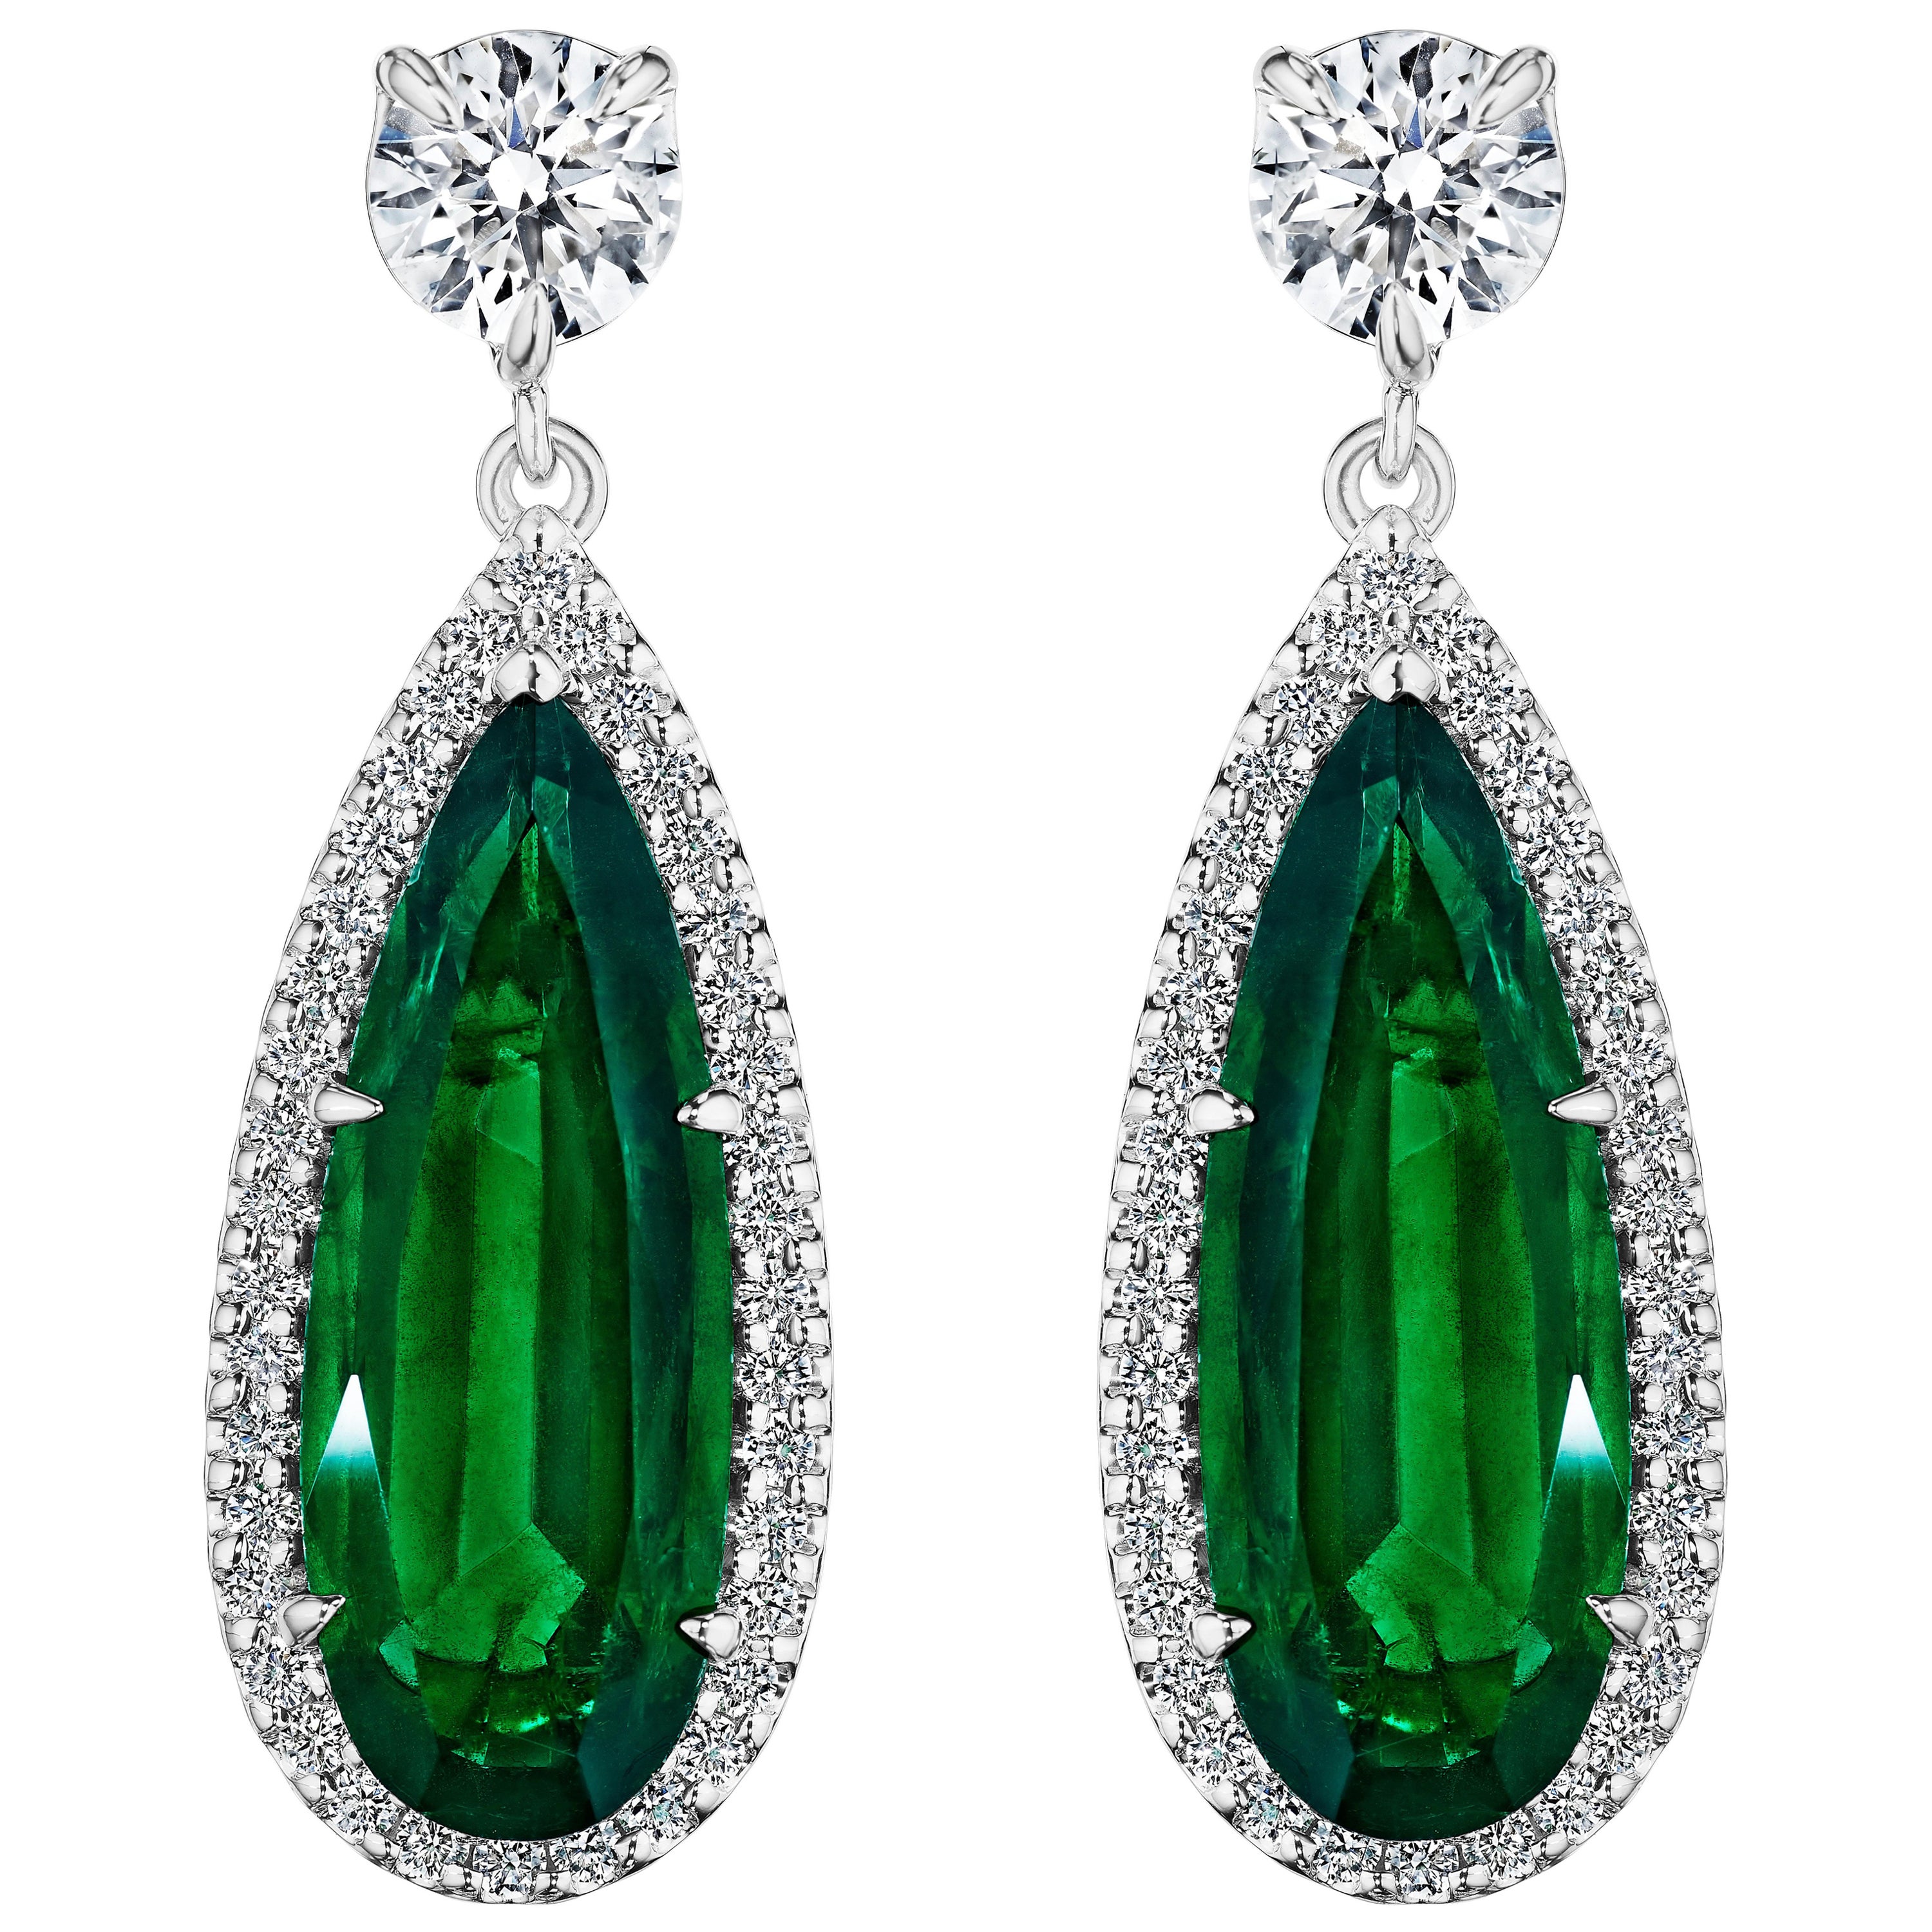 12.87ct Pear Shape Emerald & Round Diamond Earrings in 18KT White Gold